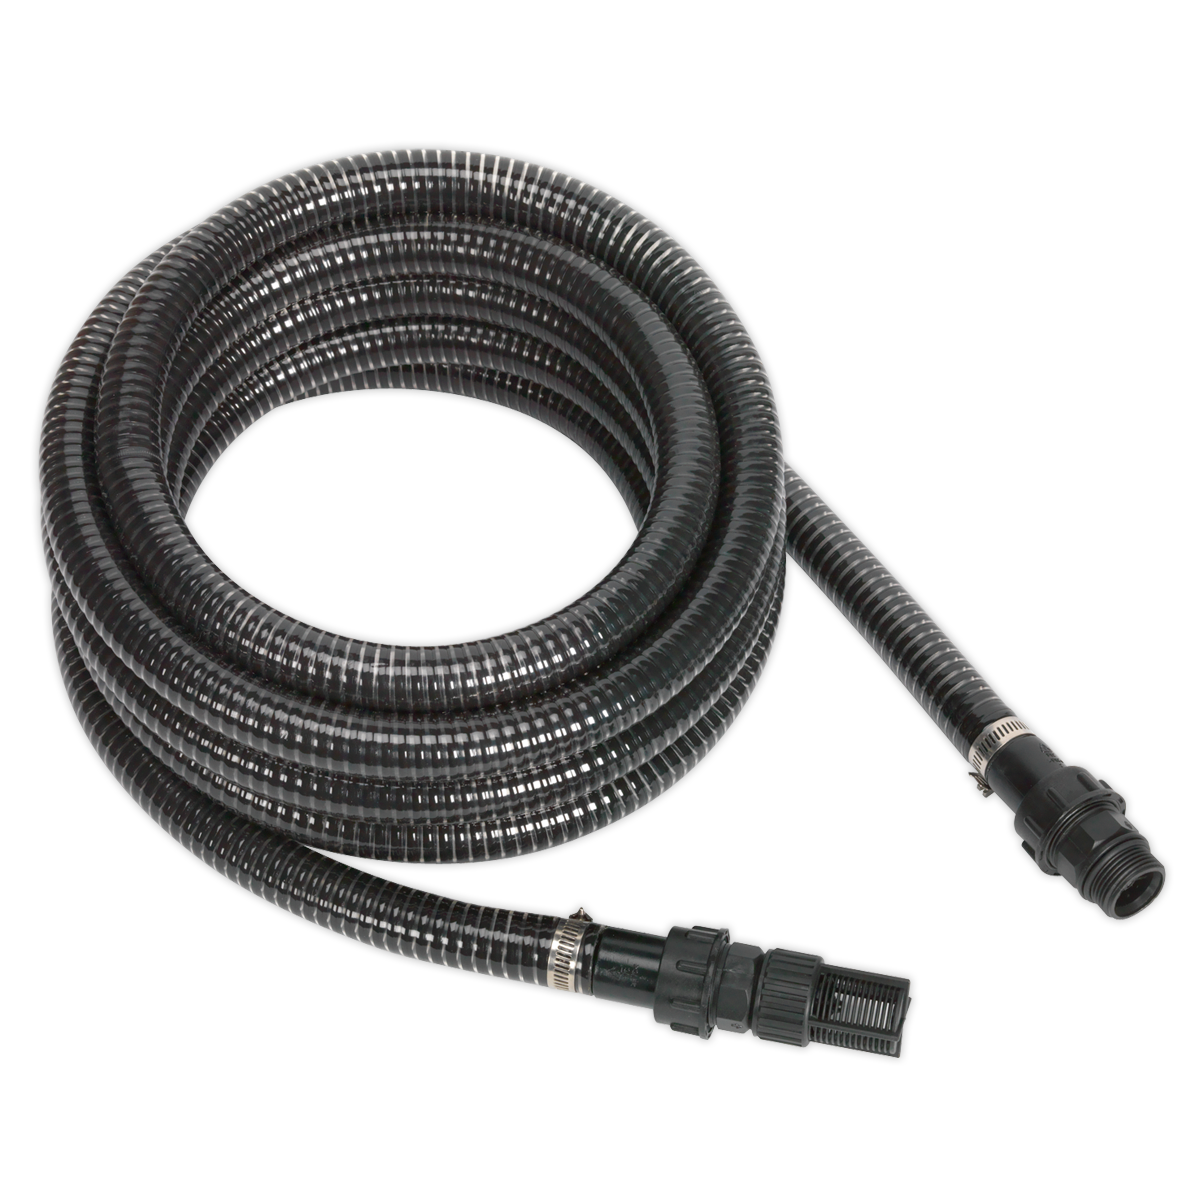 Sealey Solid Wall Suction Hose for WPS060 - Ø25mm x 7m